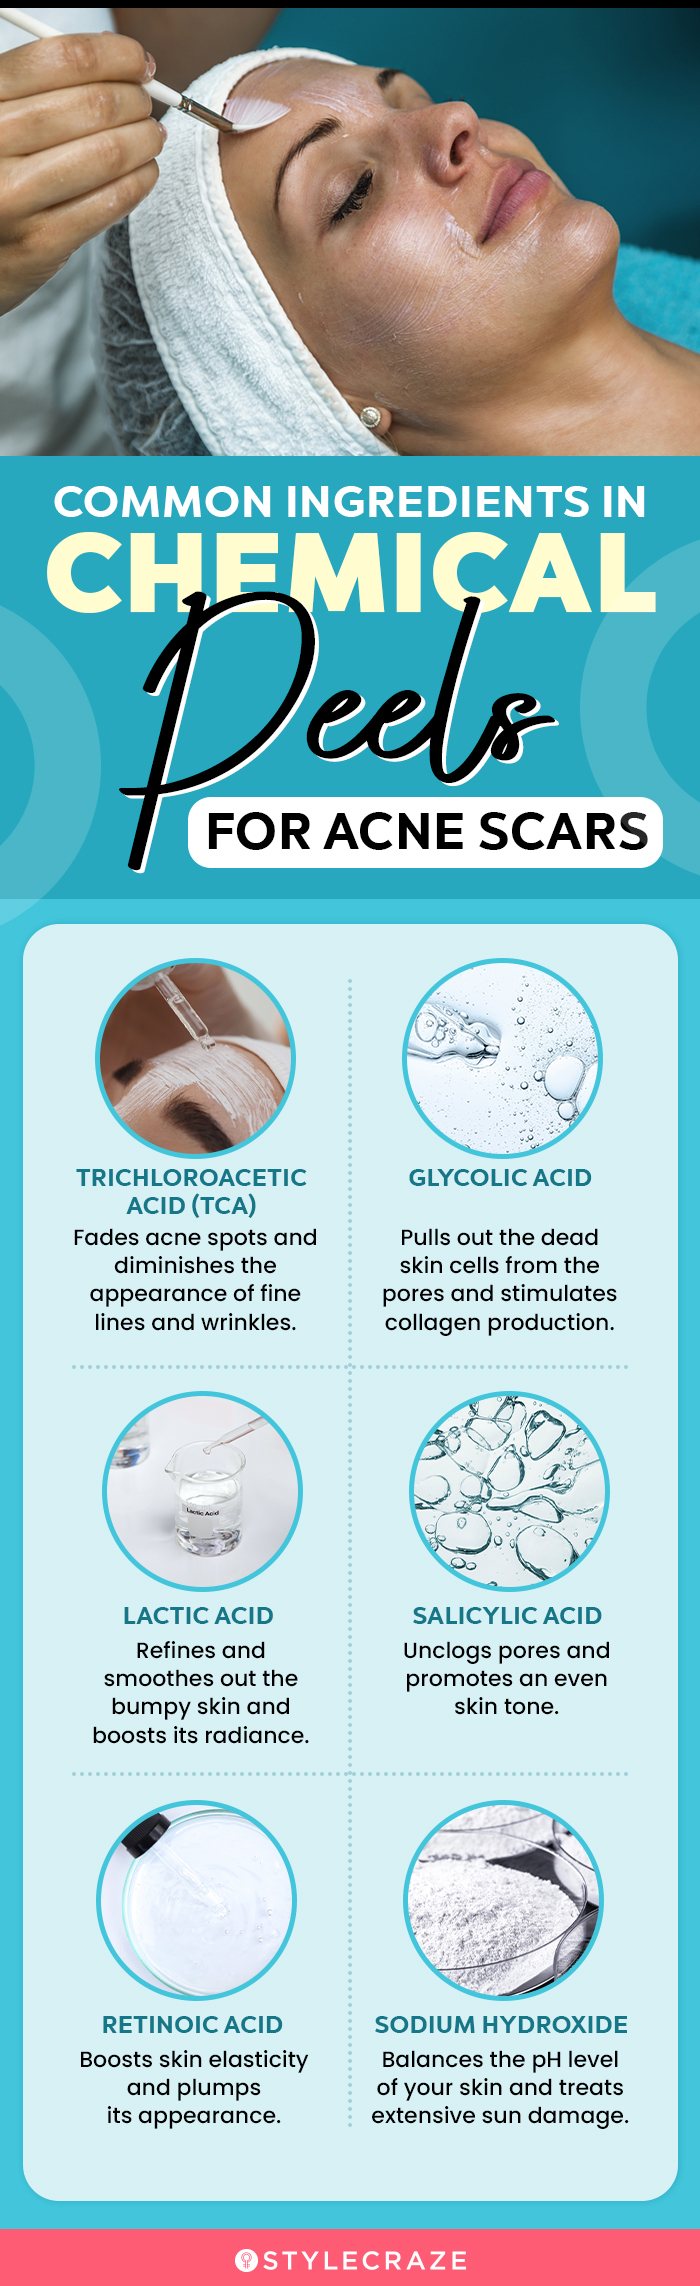 Common Ingredients In Chemical Peels For Acne Scars (infographic)